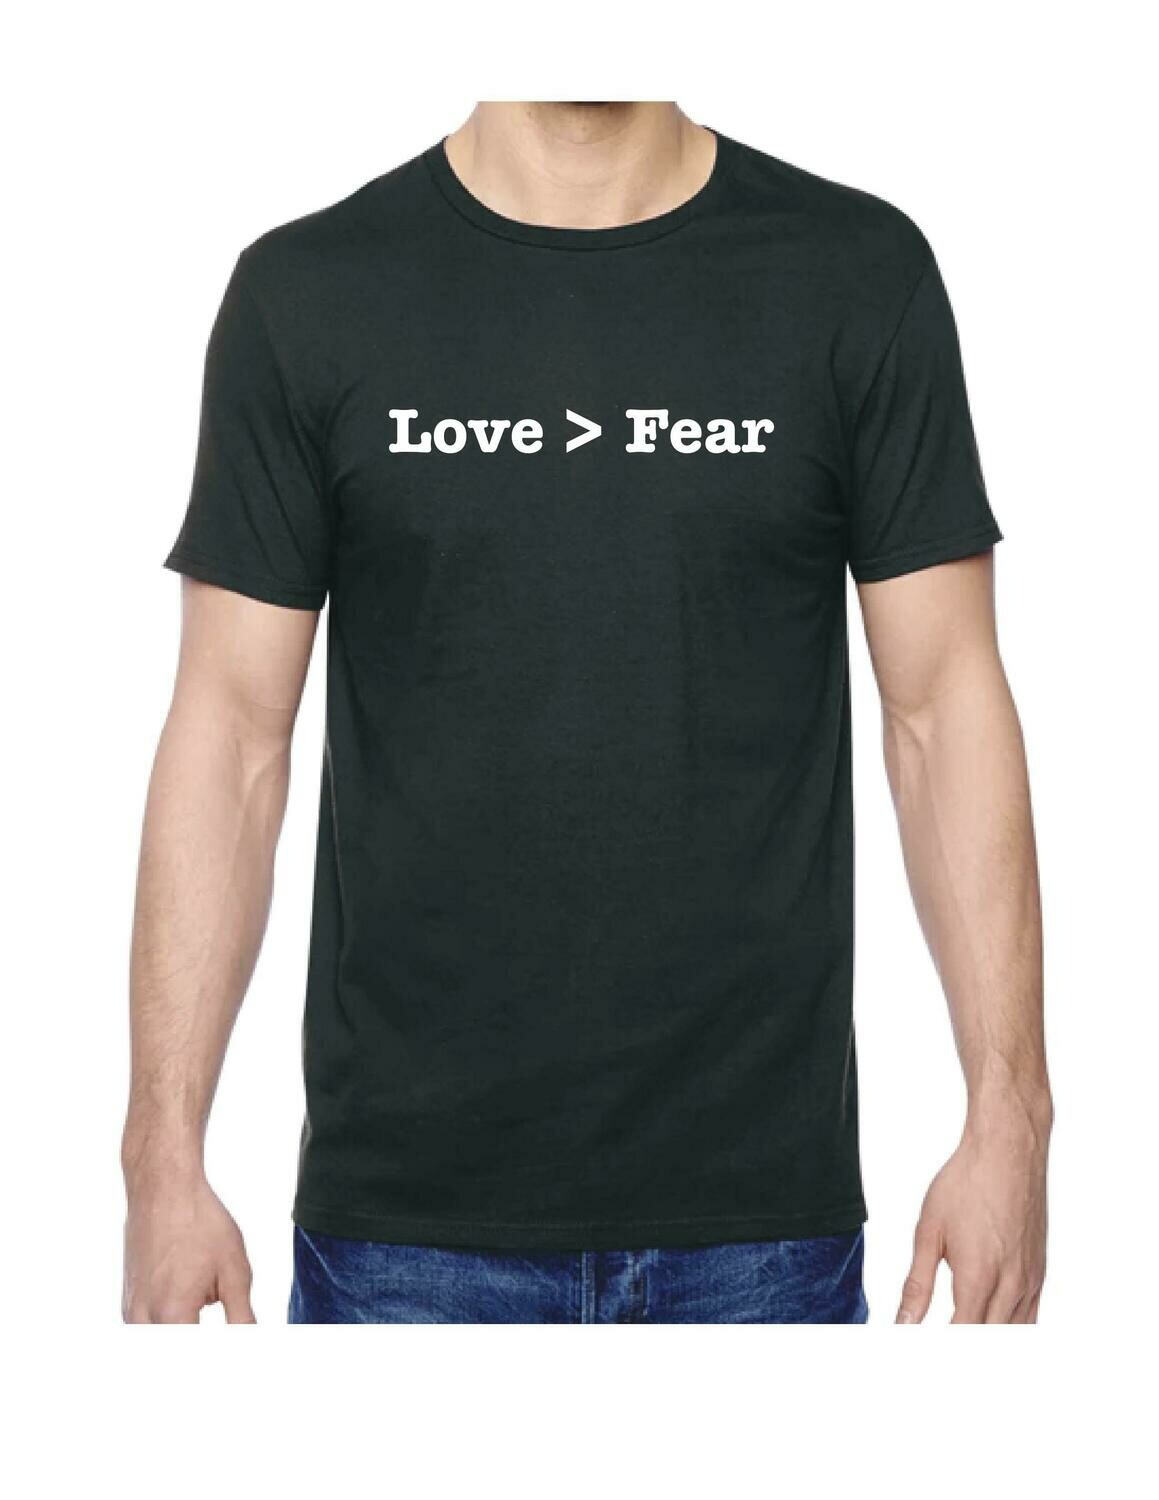 Love is Greater Than Fear T-Shirt